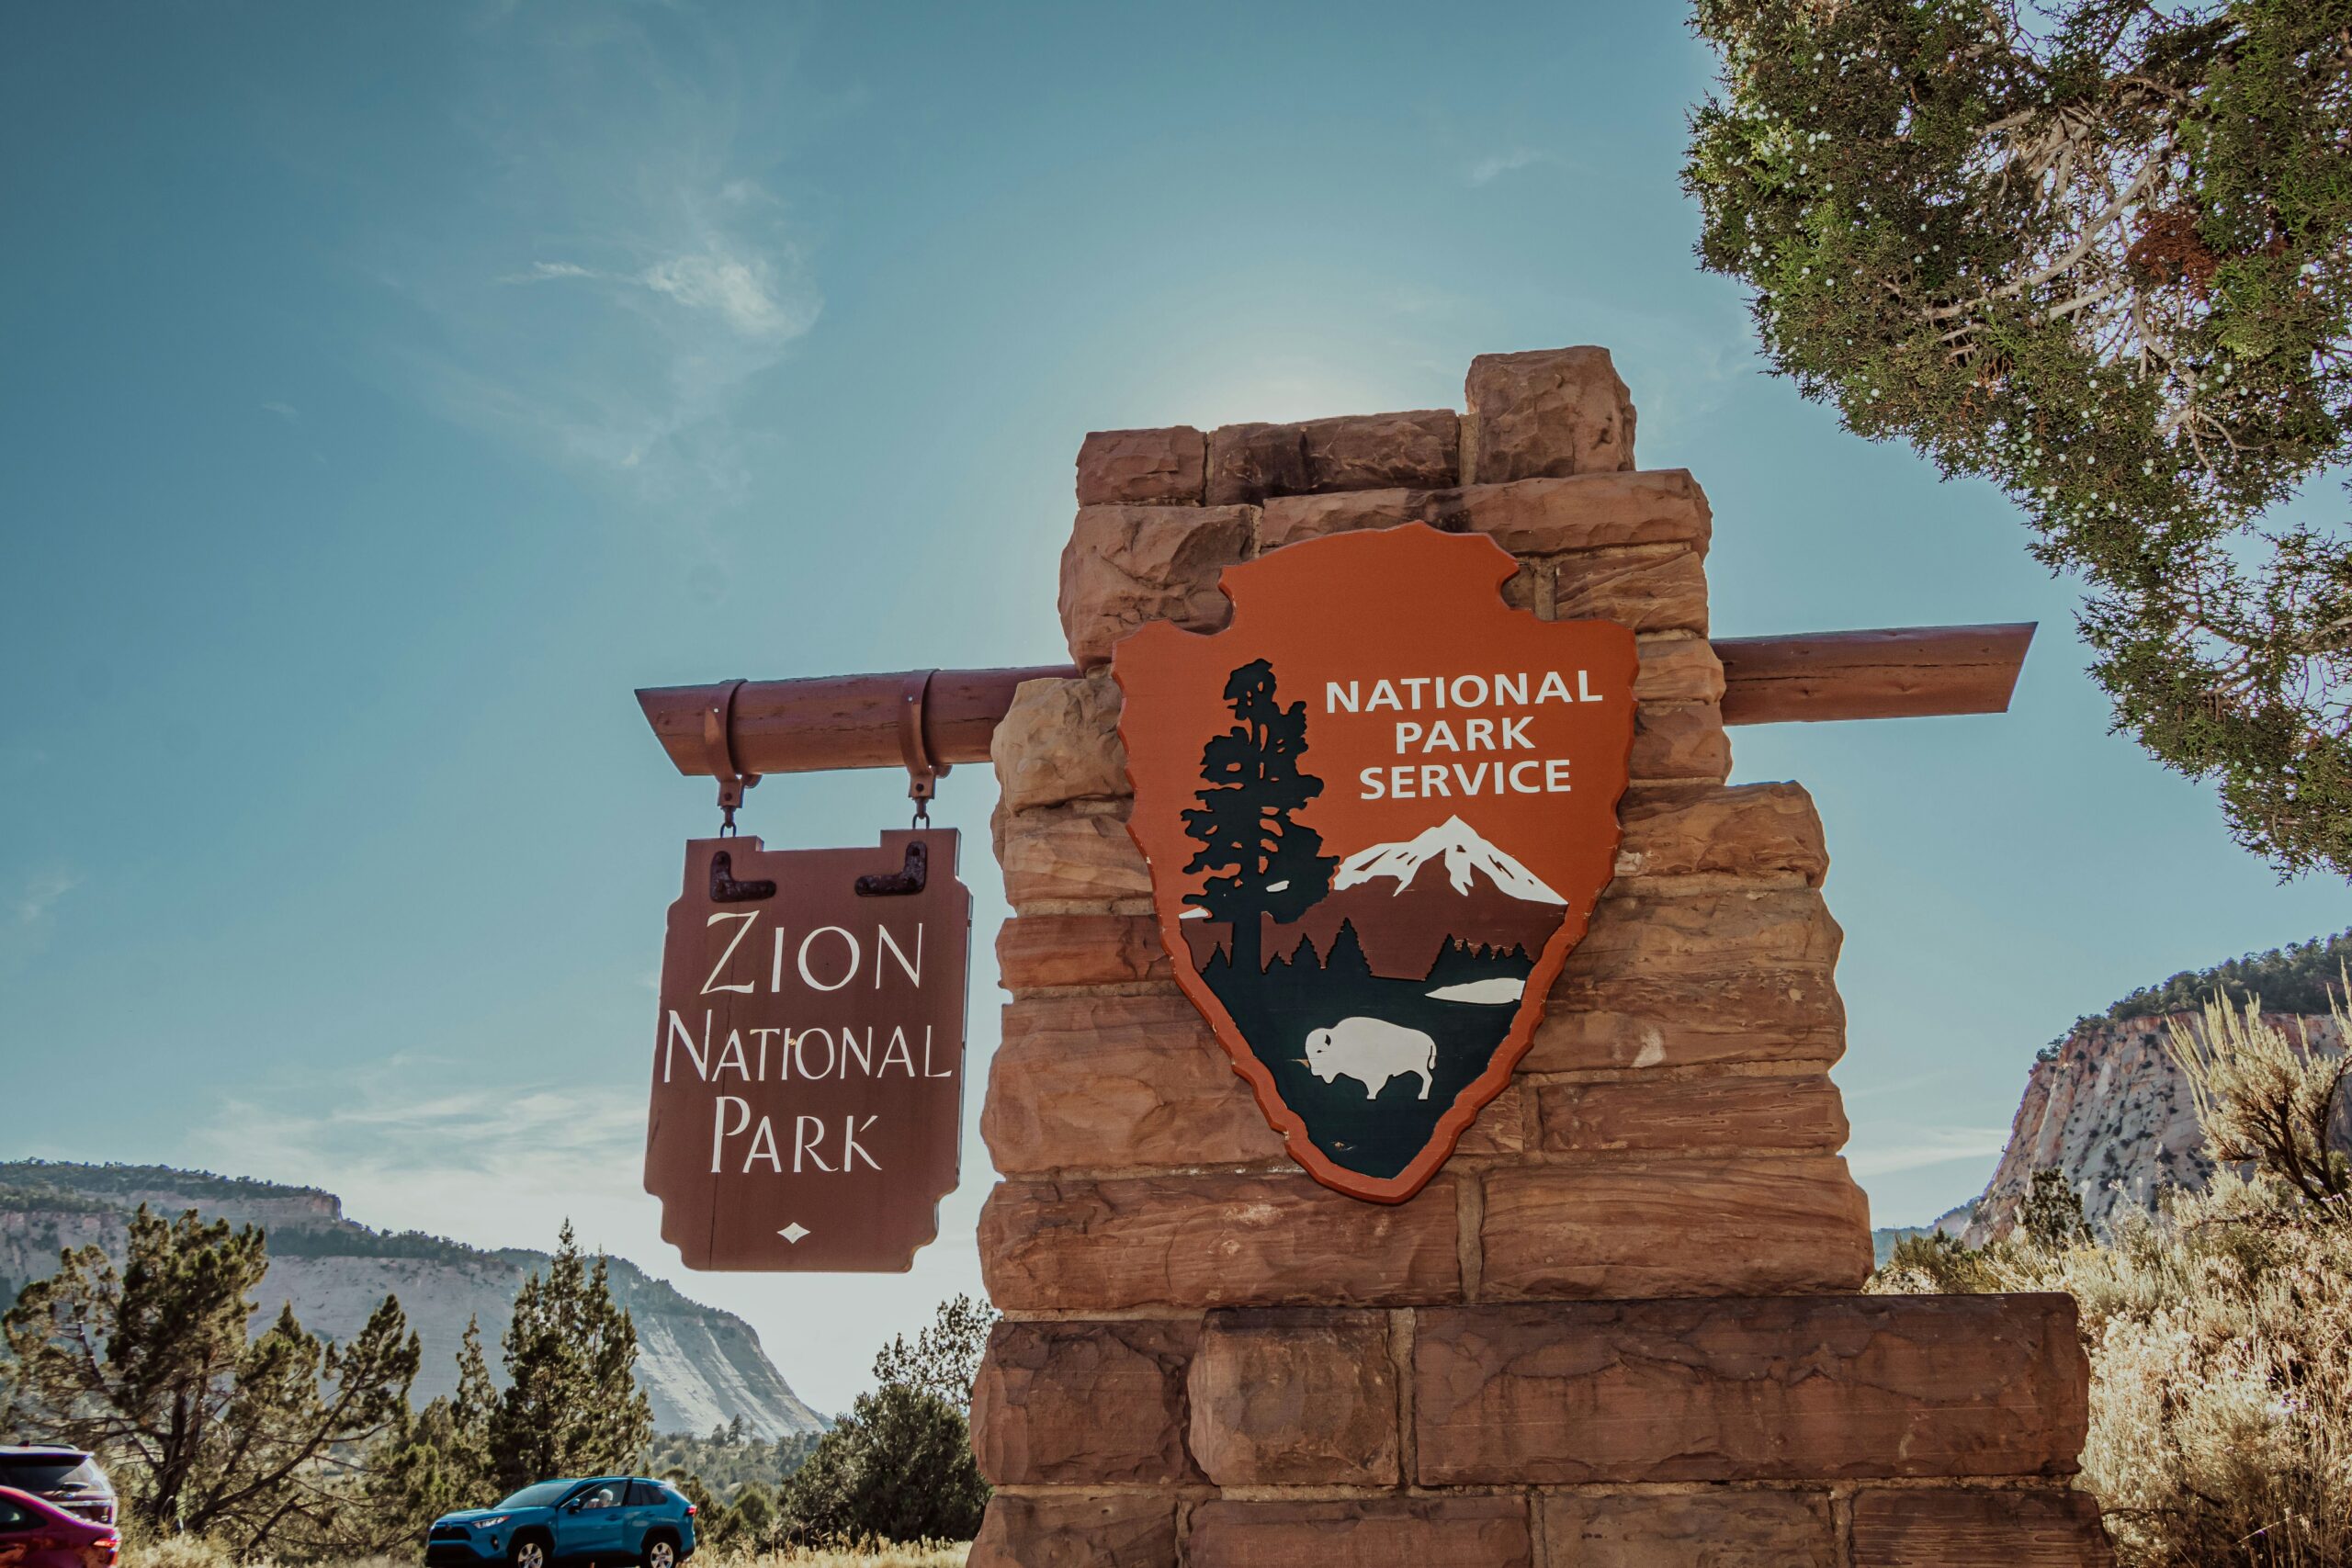 These national parks require visitors to maker a reservation during these peak times.
Pictured: the Zion National Park entrance sign 